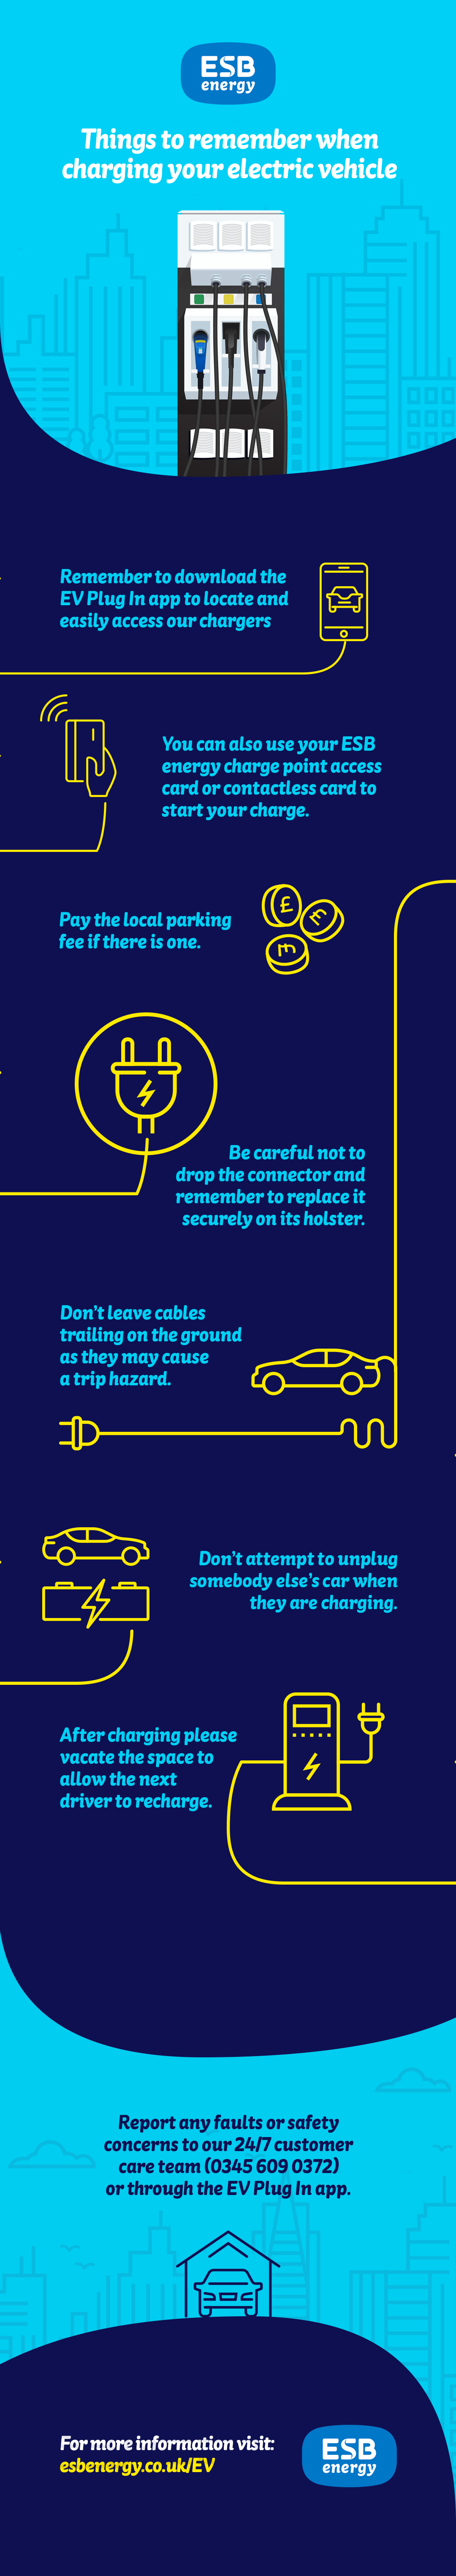 A guide to driver etiquette around EV chargers